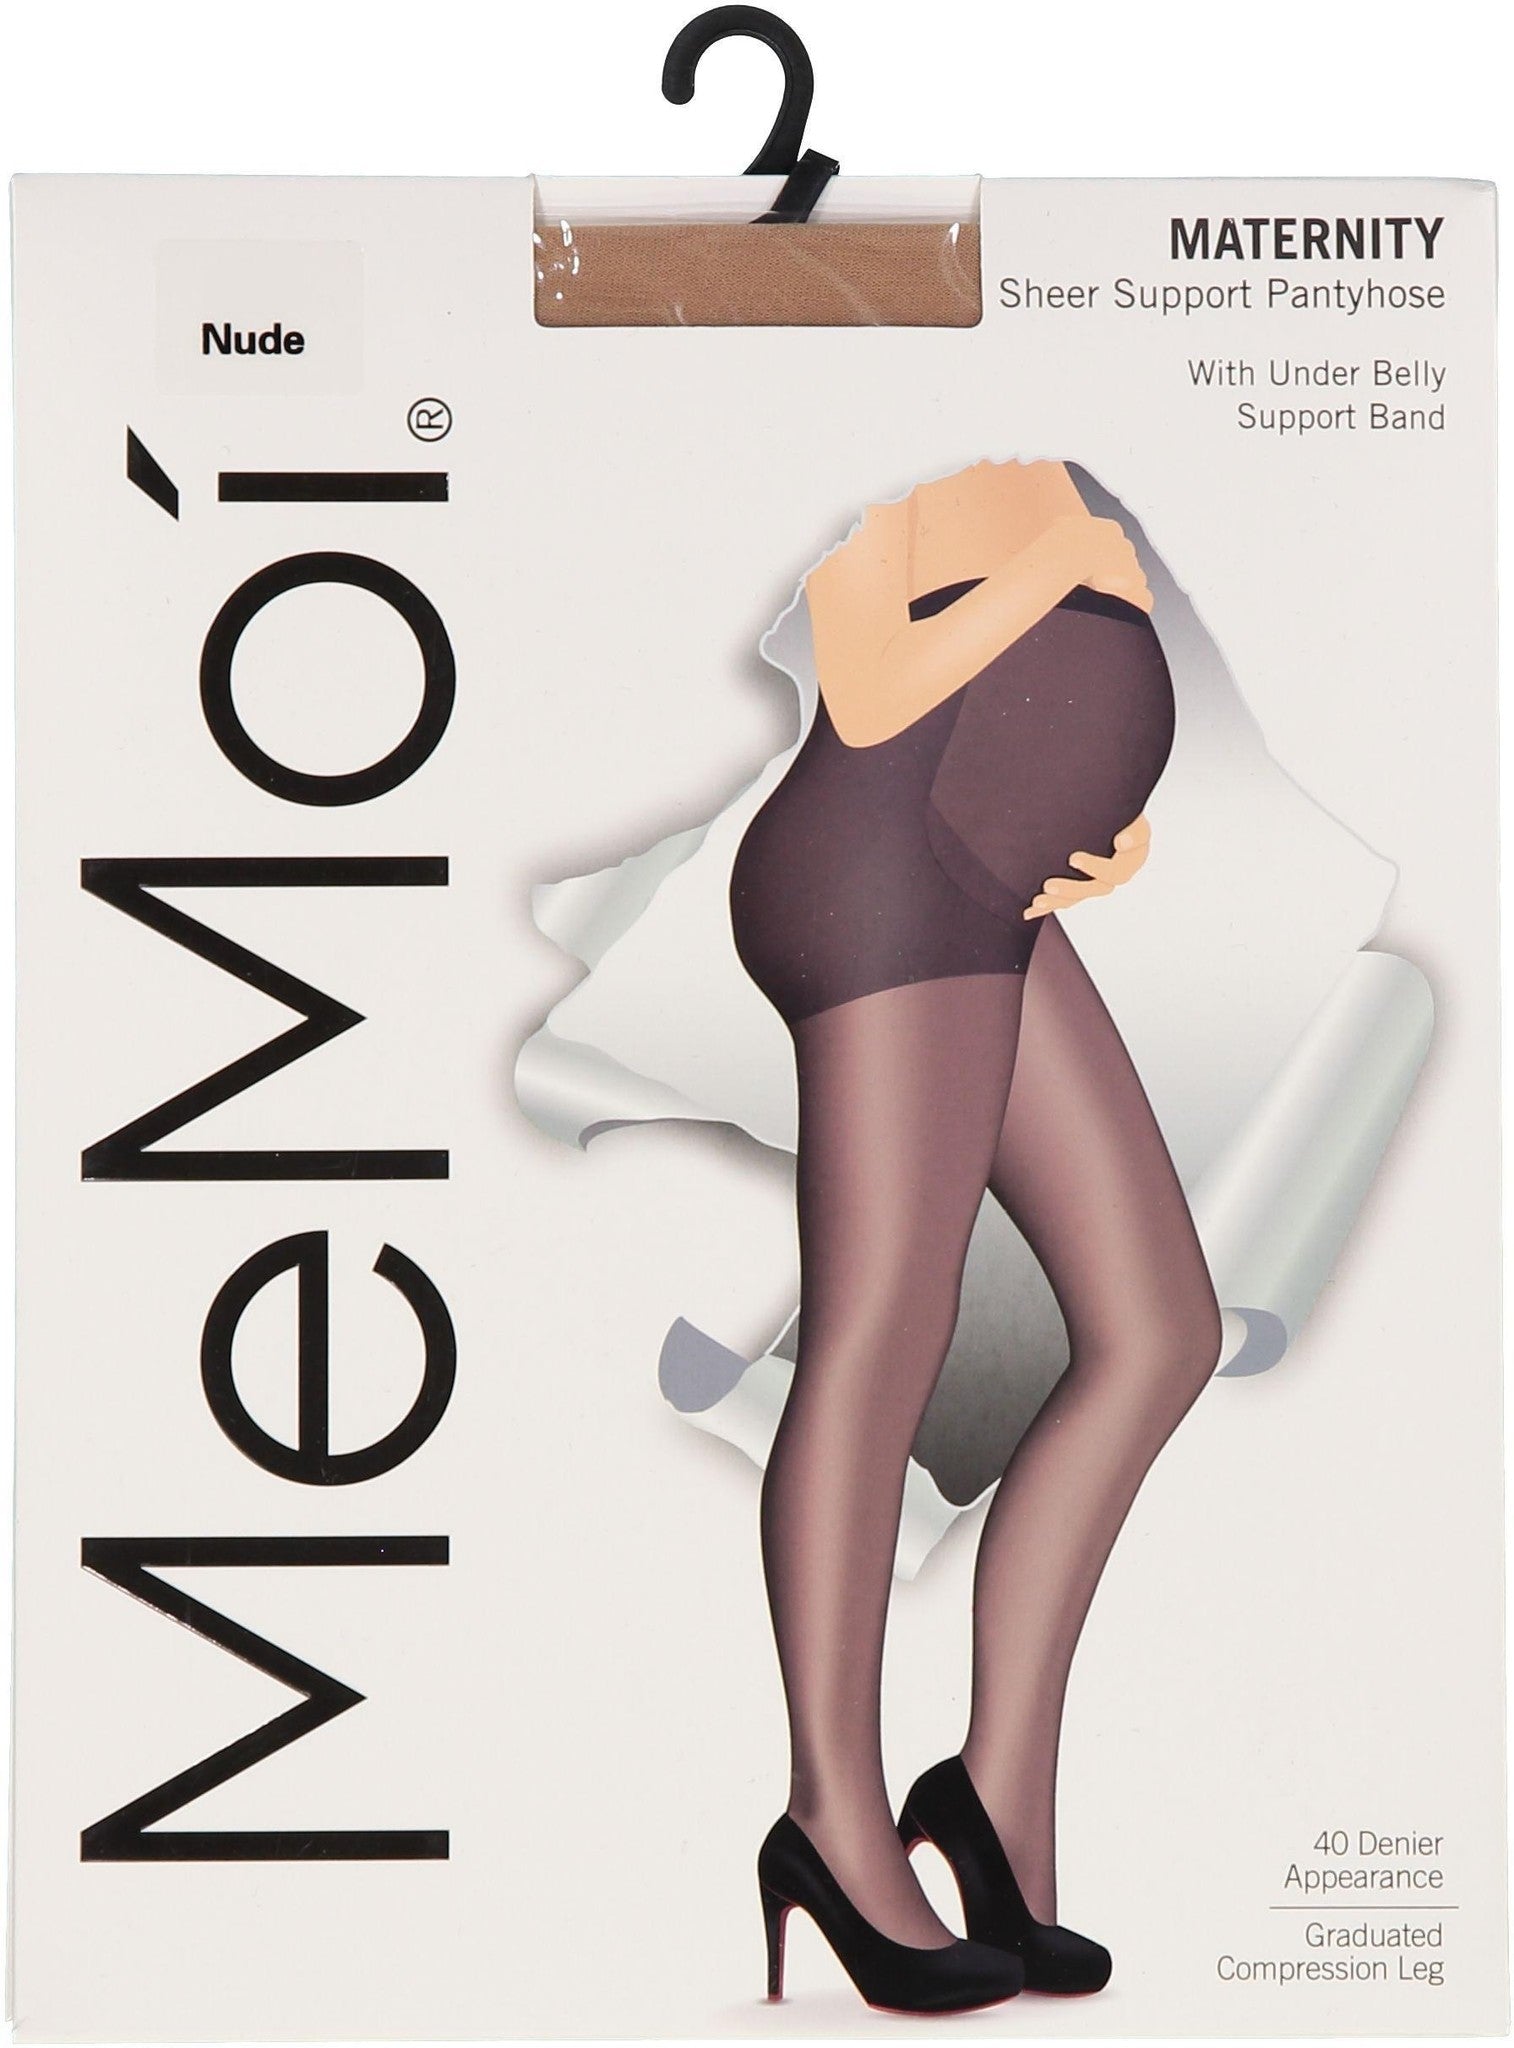 MA-402 MEMOI MATERNITY SHEER SUPPORT PANTYHOSE – Wesley Hills Boutique